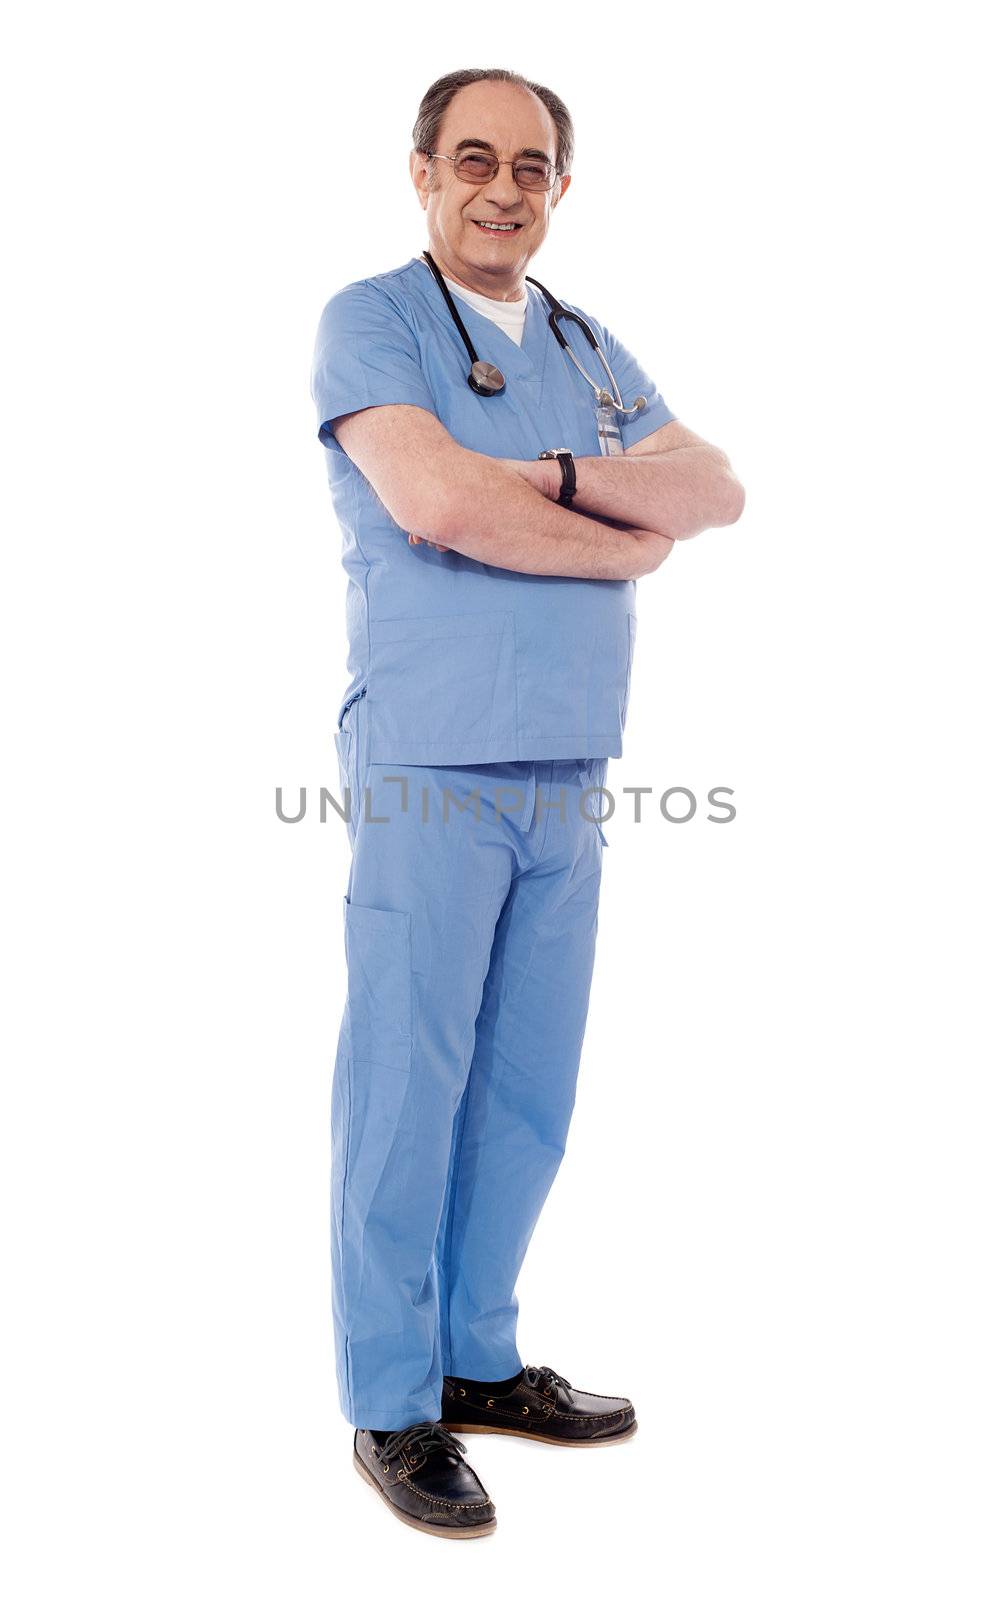 Aged medical professional posing with stethoscope around his neck looking at camera